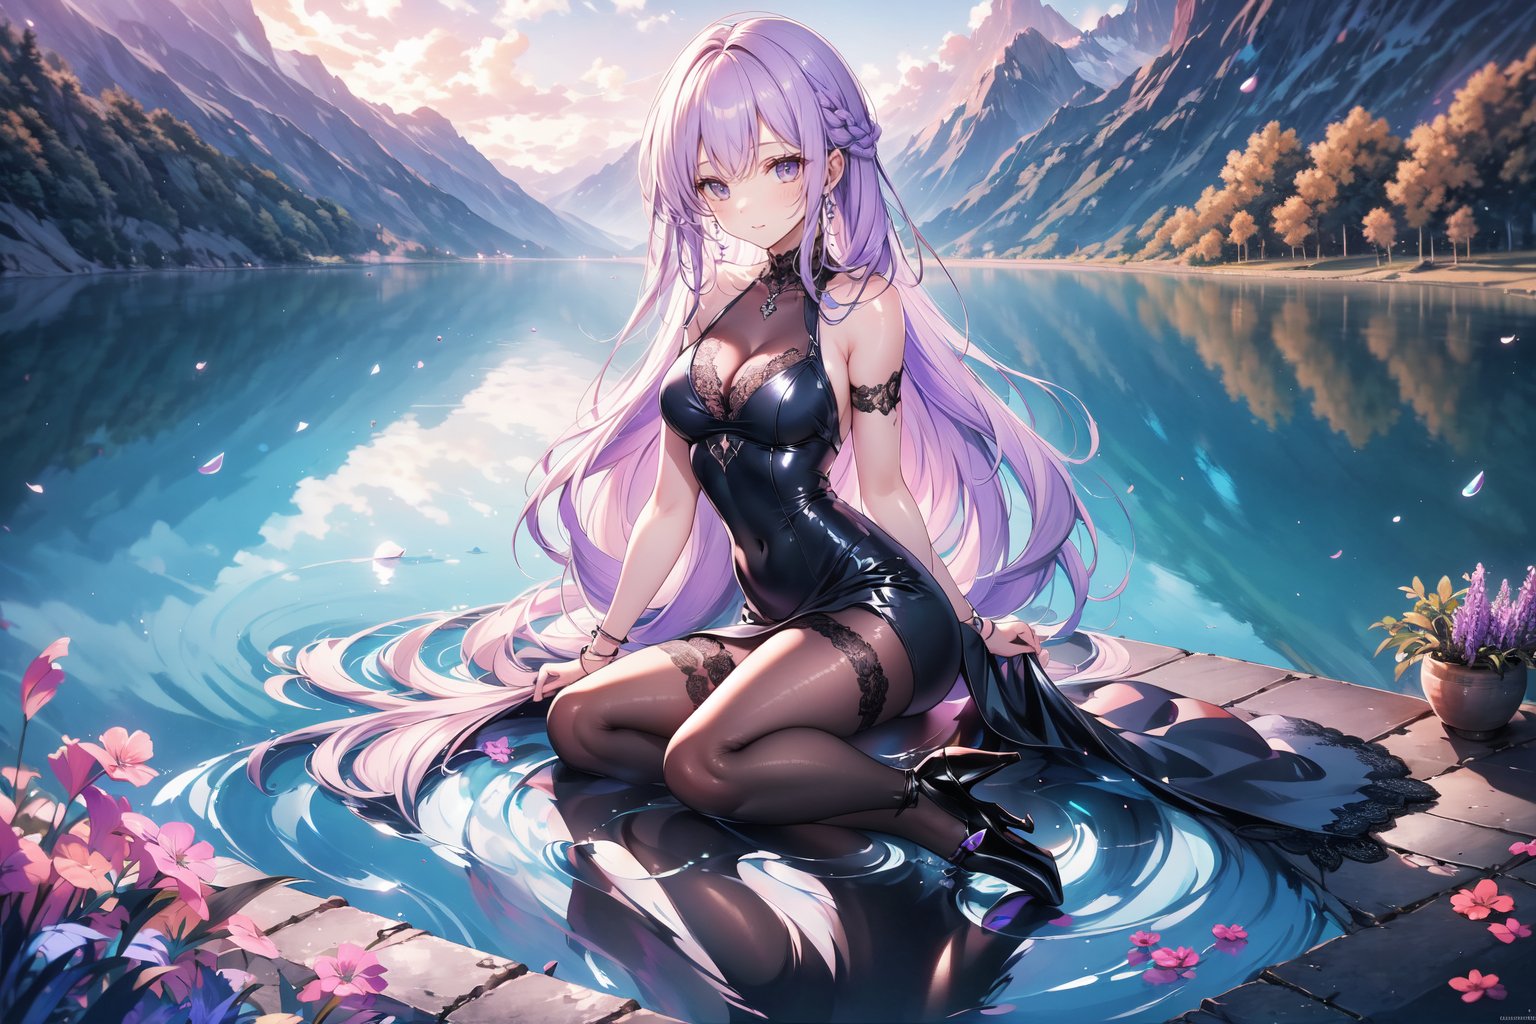 A 20-year-old girl, with long lavender hair, wavy hair, black Gothic dress, lace stockings, high heels, water ripples, by the lake